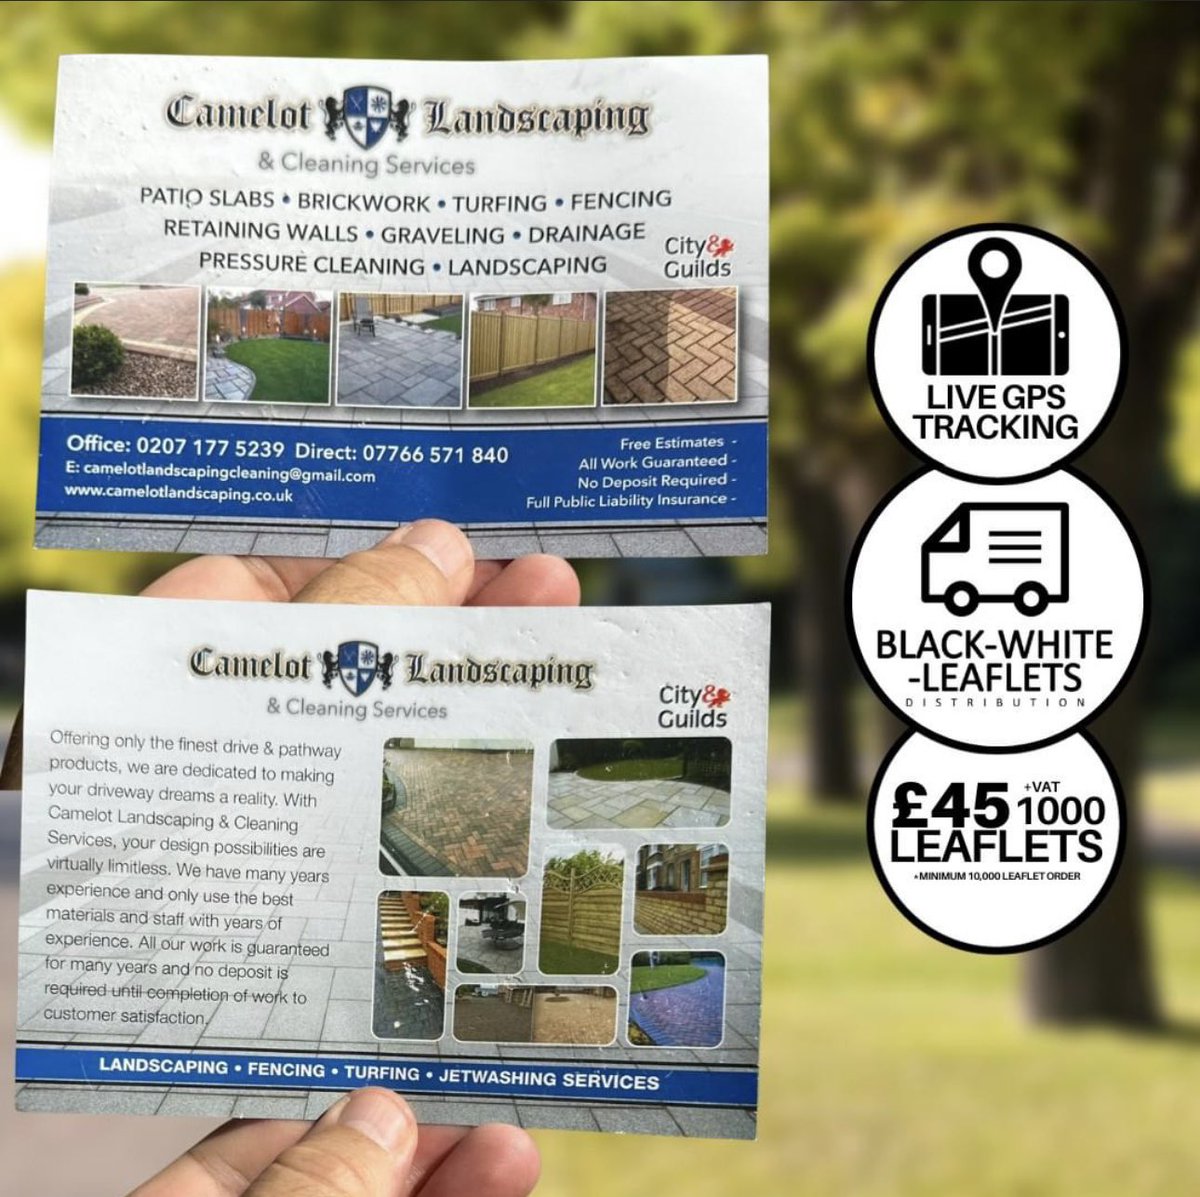 Delivering for Camelot Landscaping, give them a call for all your landscaping needs on 07766 571 840.

For more information on how we can help your business grow please visit black-white-leaflets-distribution.com 

#LandscapingGoals #leafleting #flyers #leafletdistribution